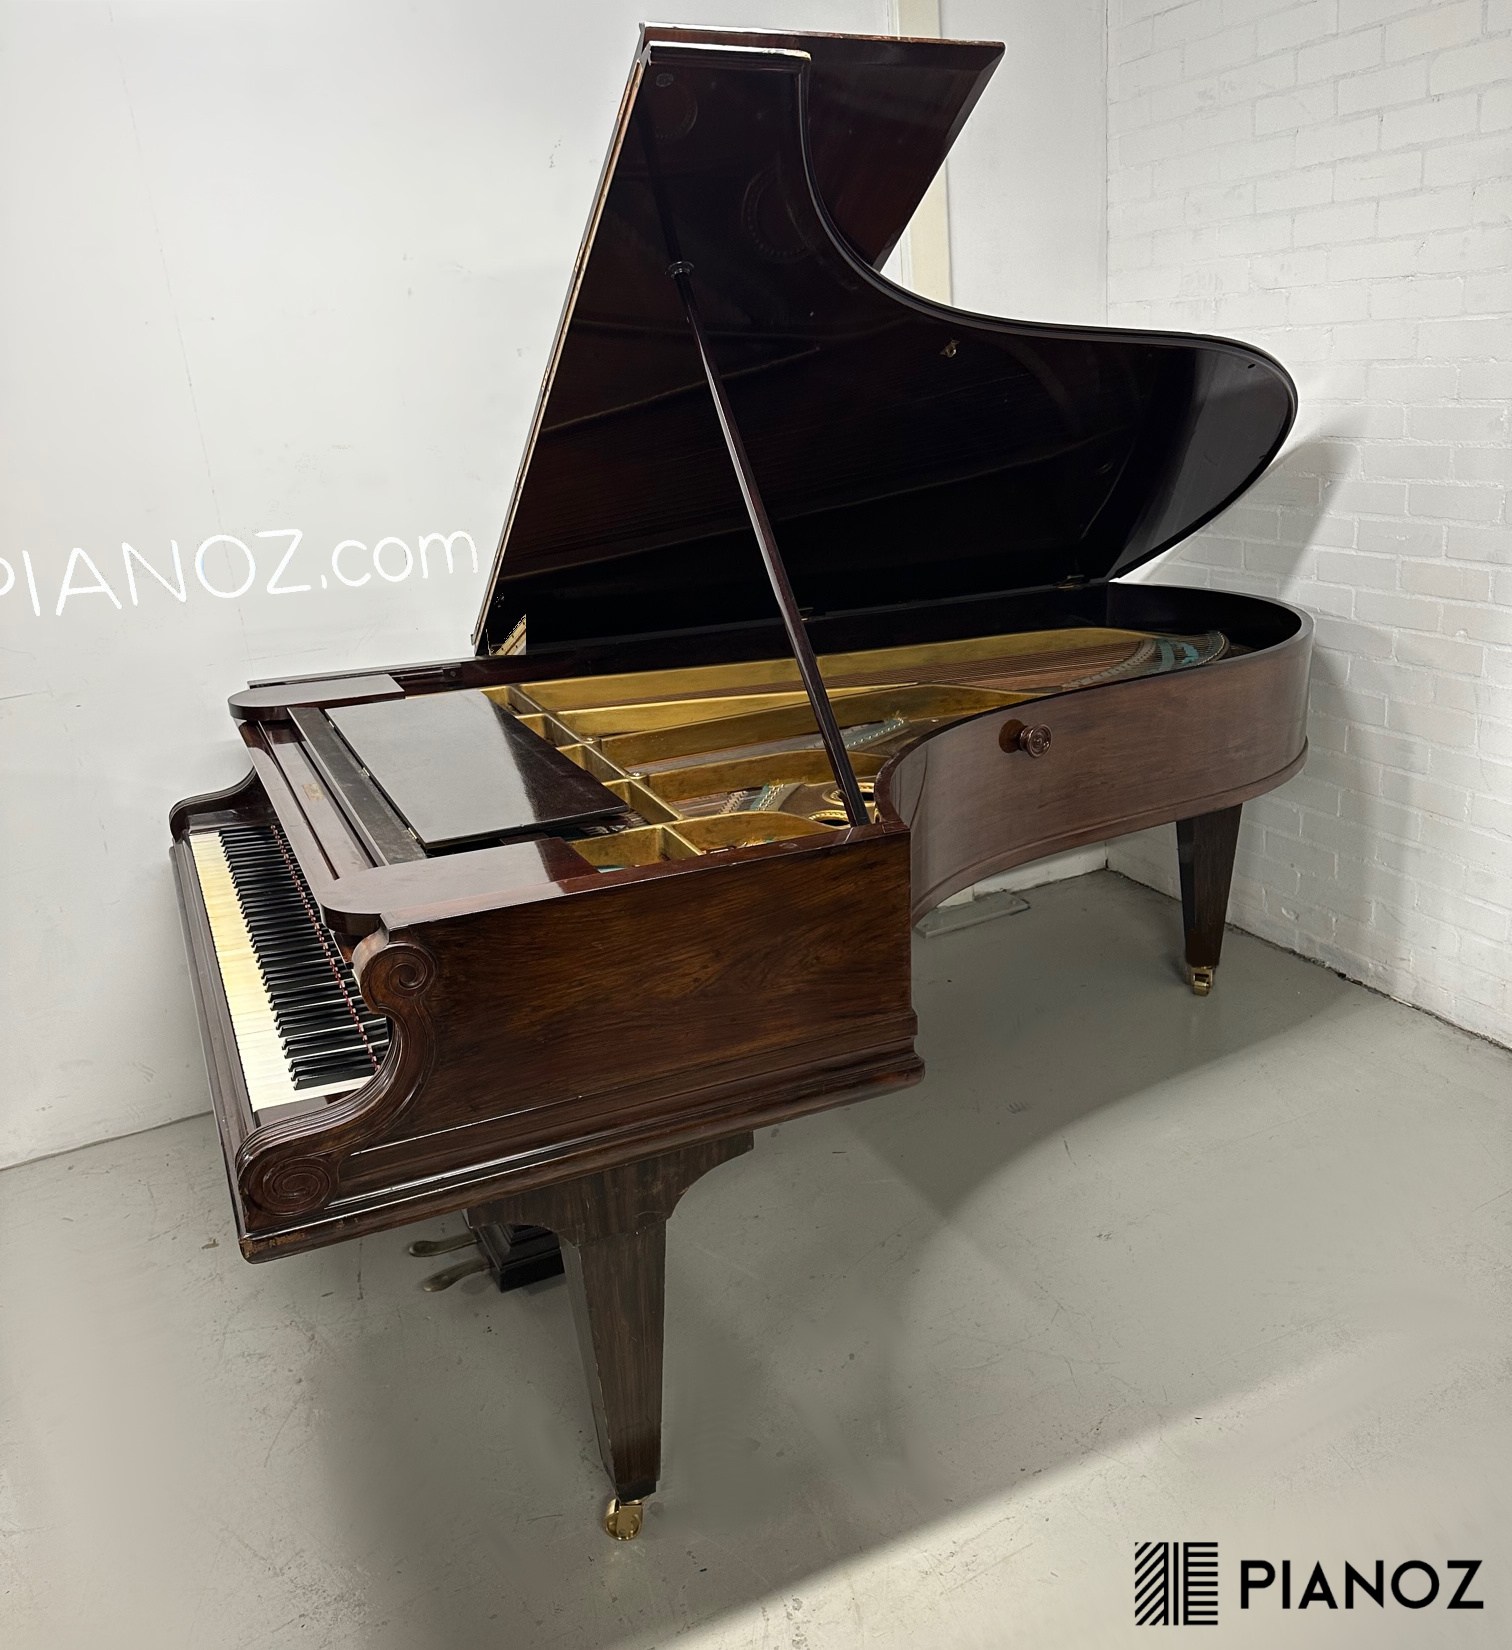 Bechstein Model D Concert Grand piano for sale in UK